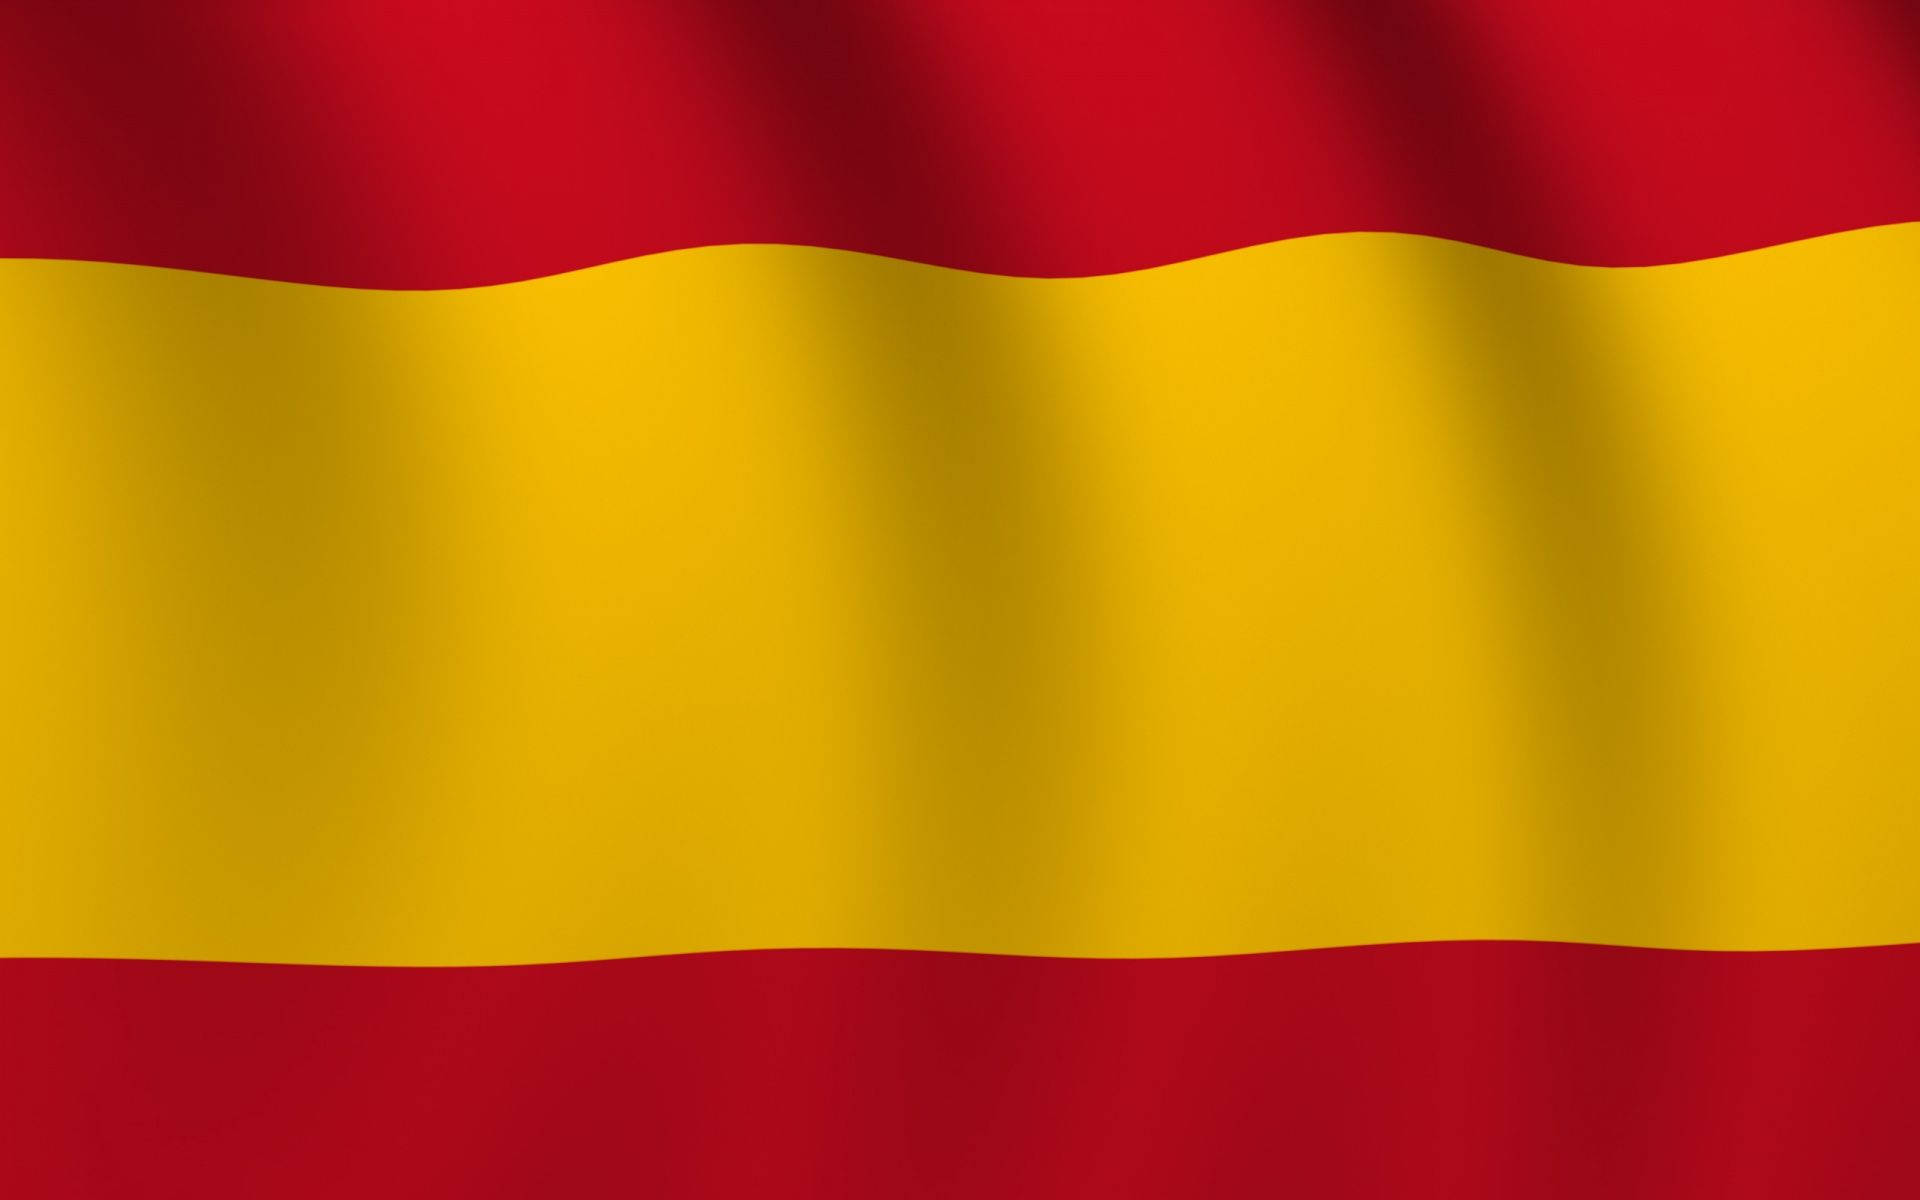 The Vibrant Display Of The National Flag Of Spain